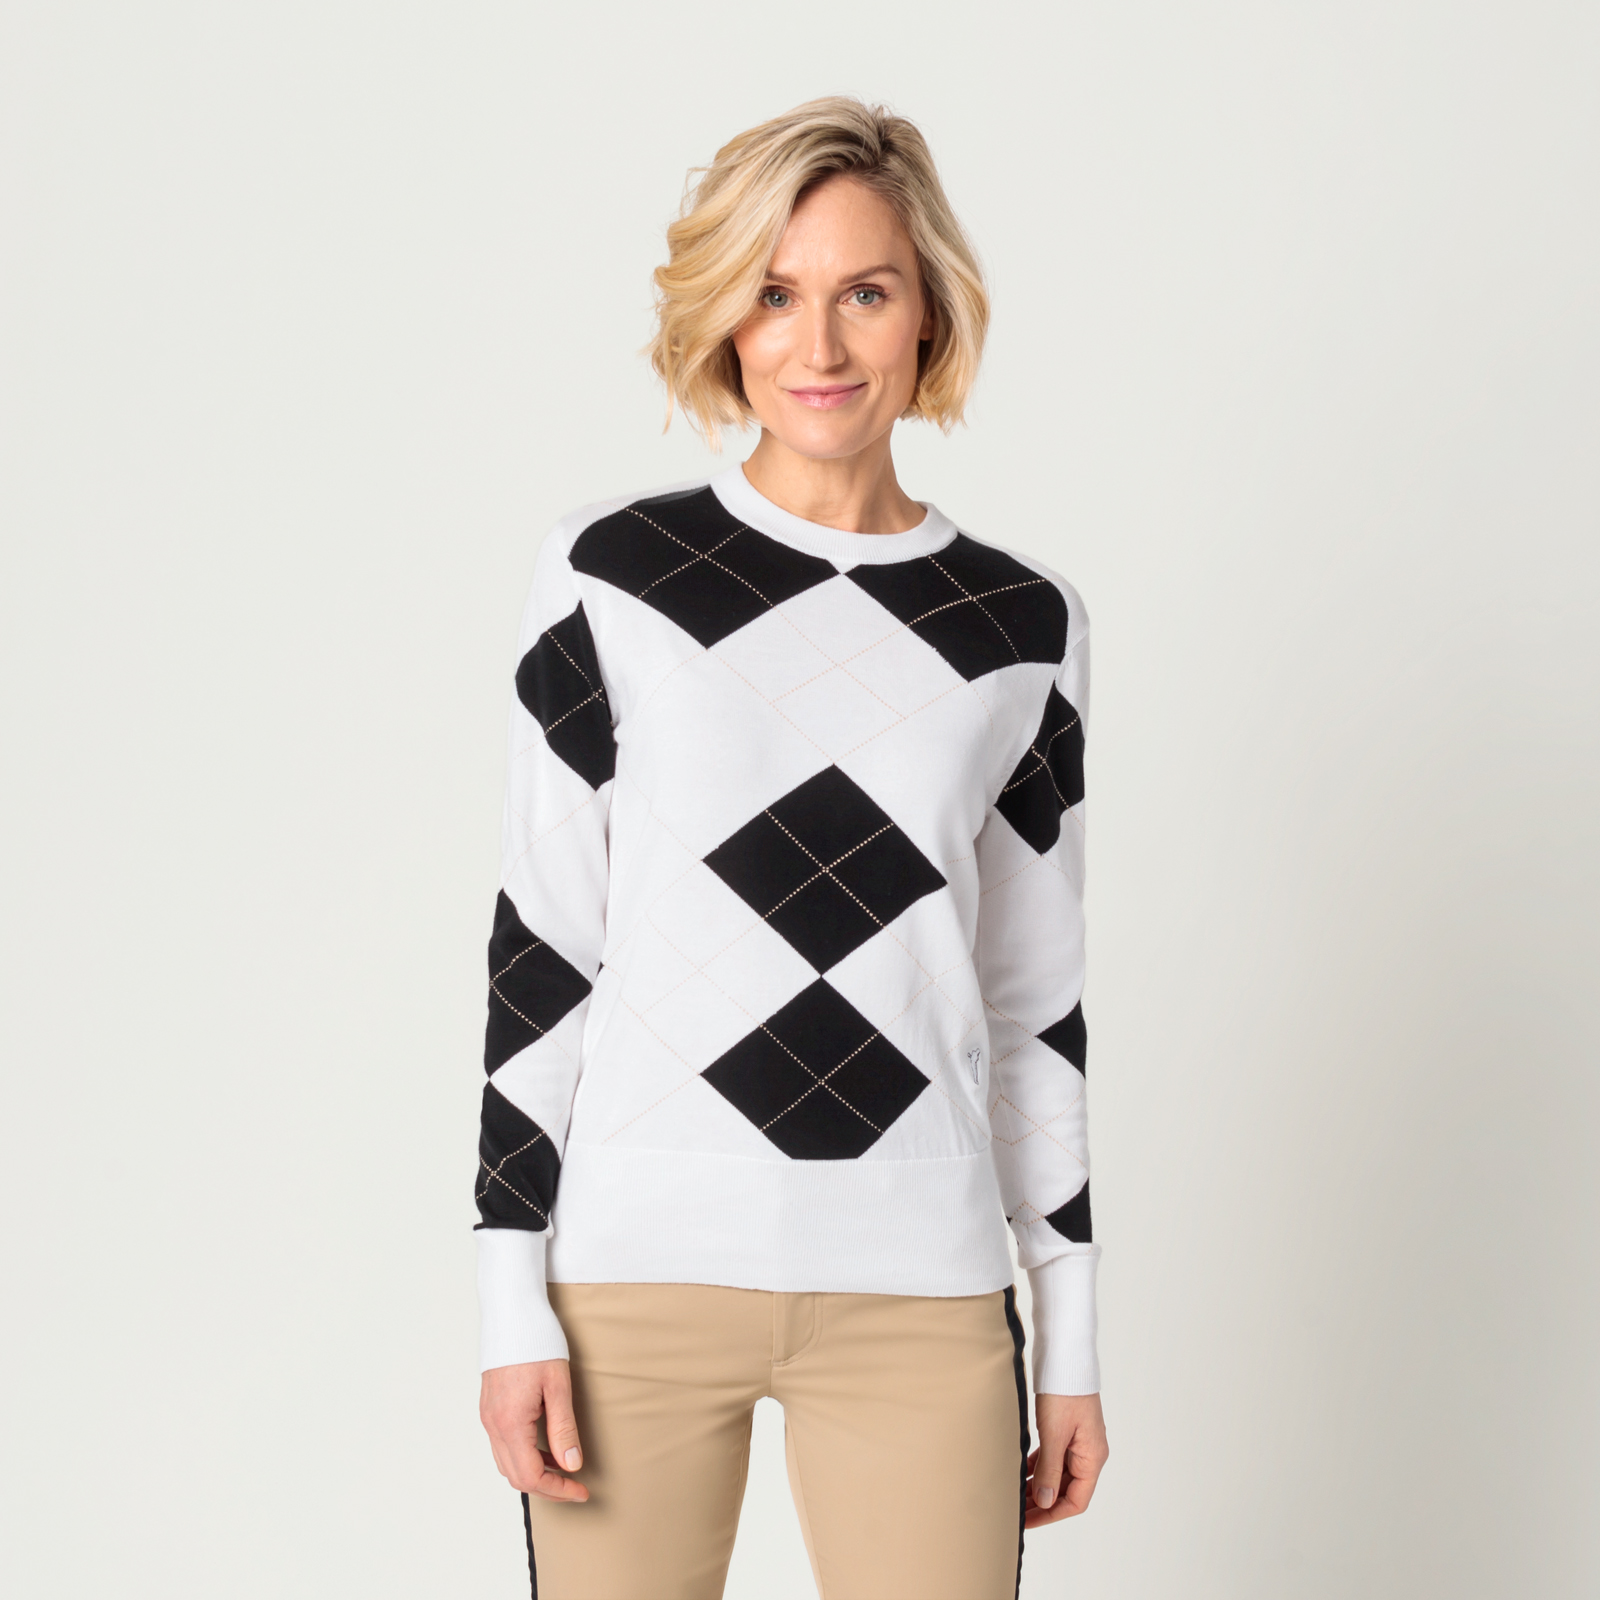 Ladies' argyle golf sweater made from pure Pima cotton 